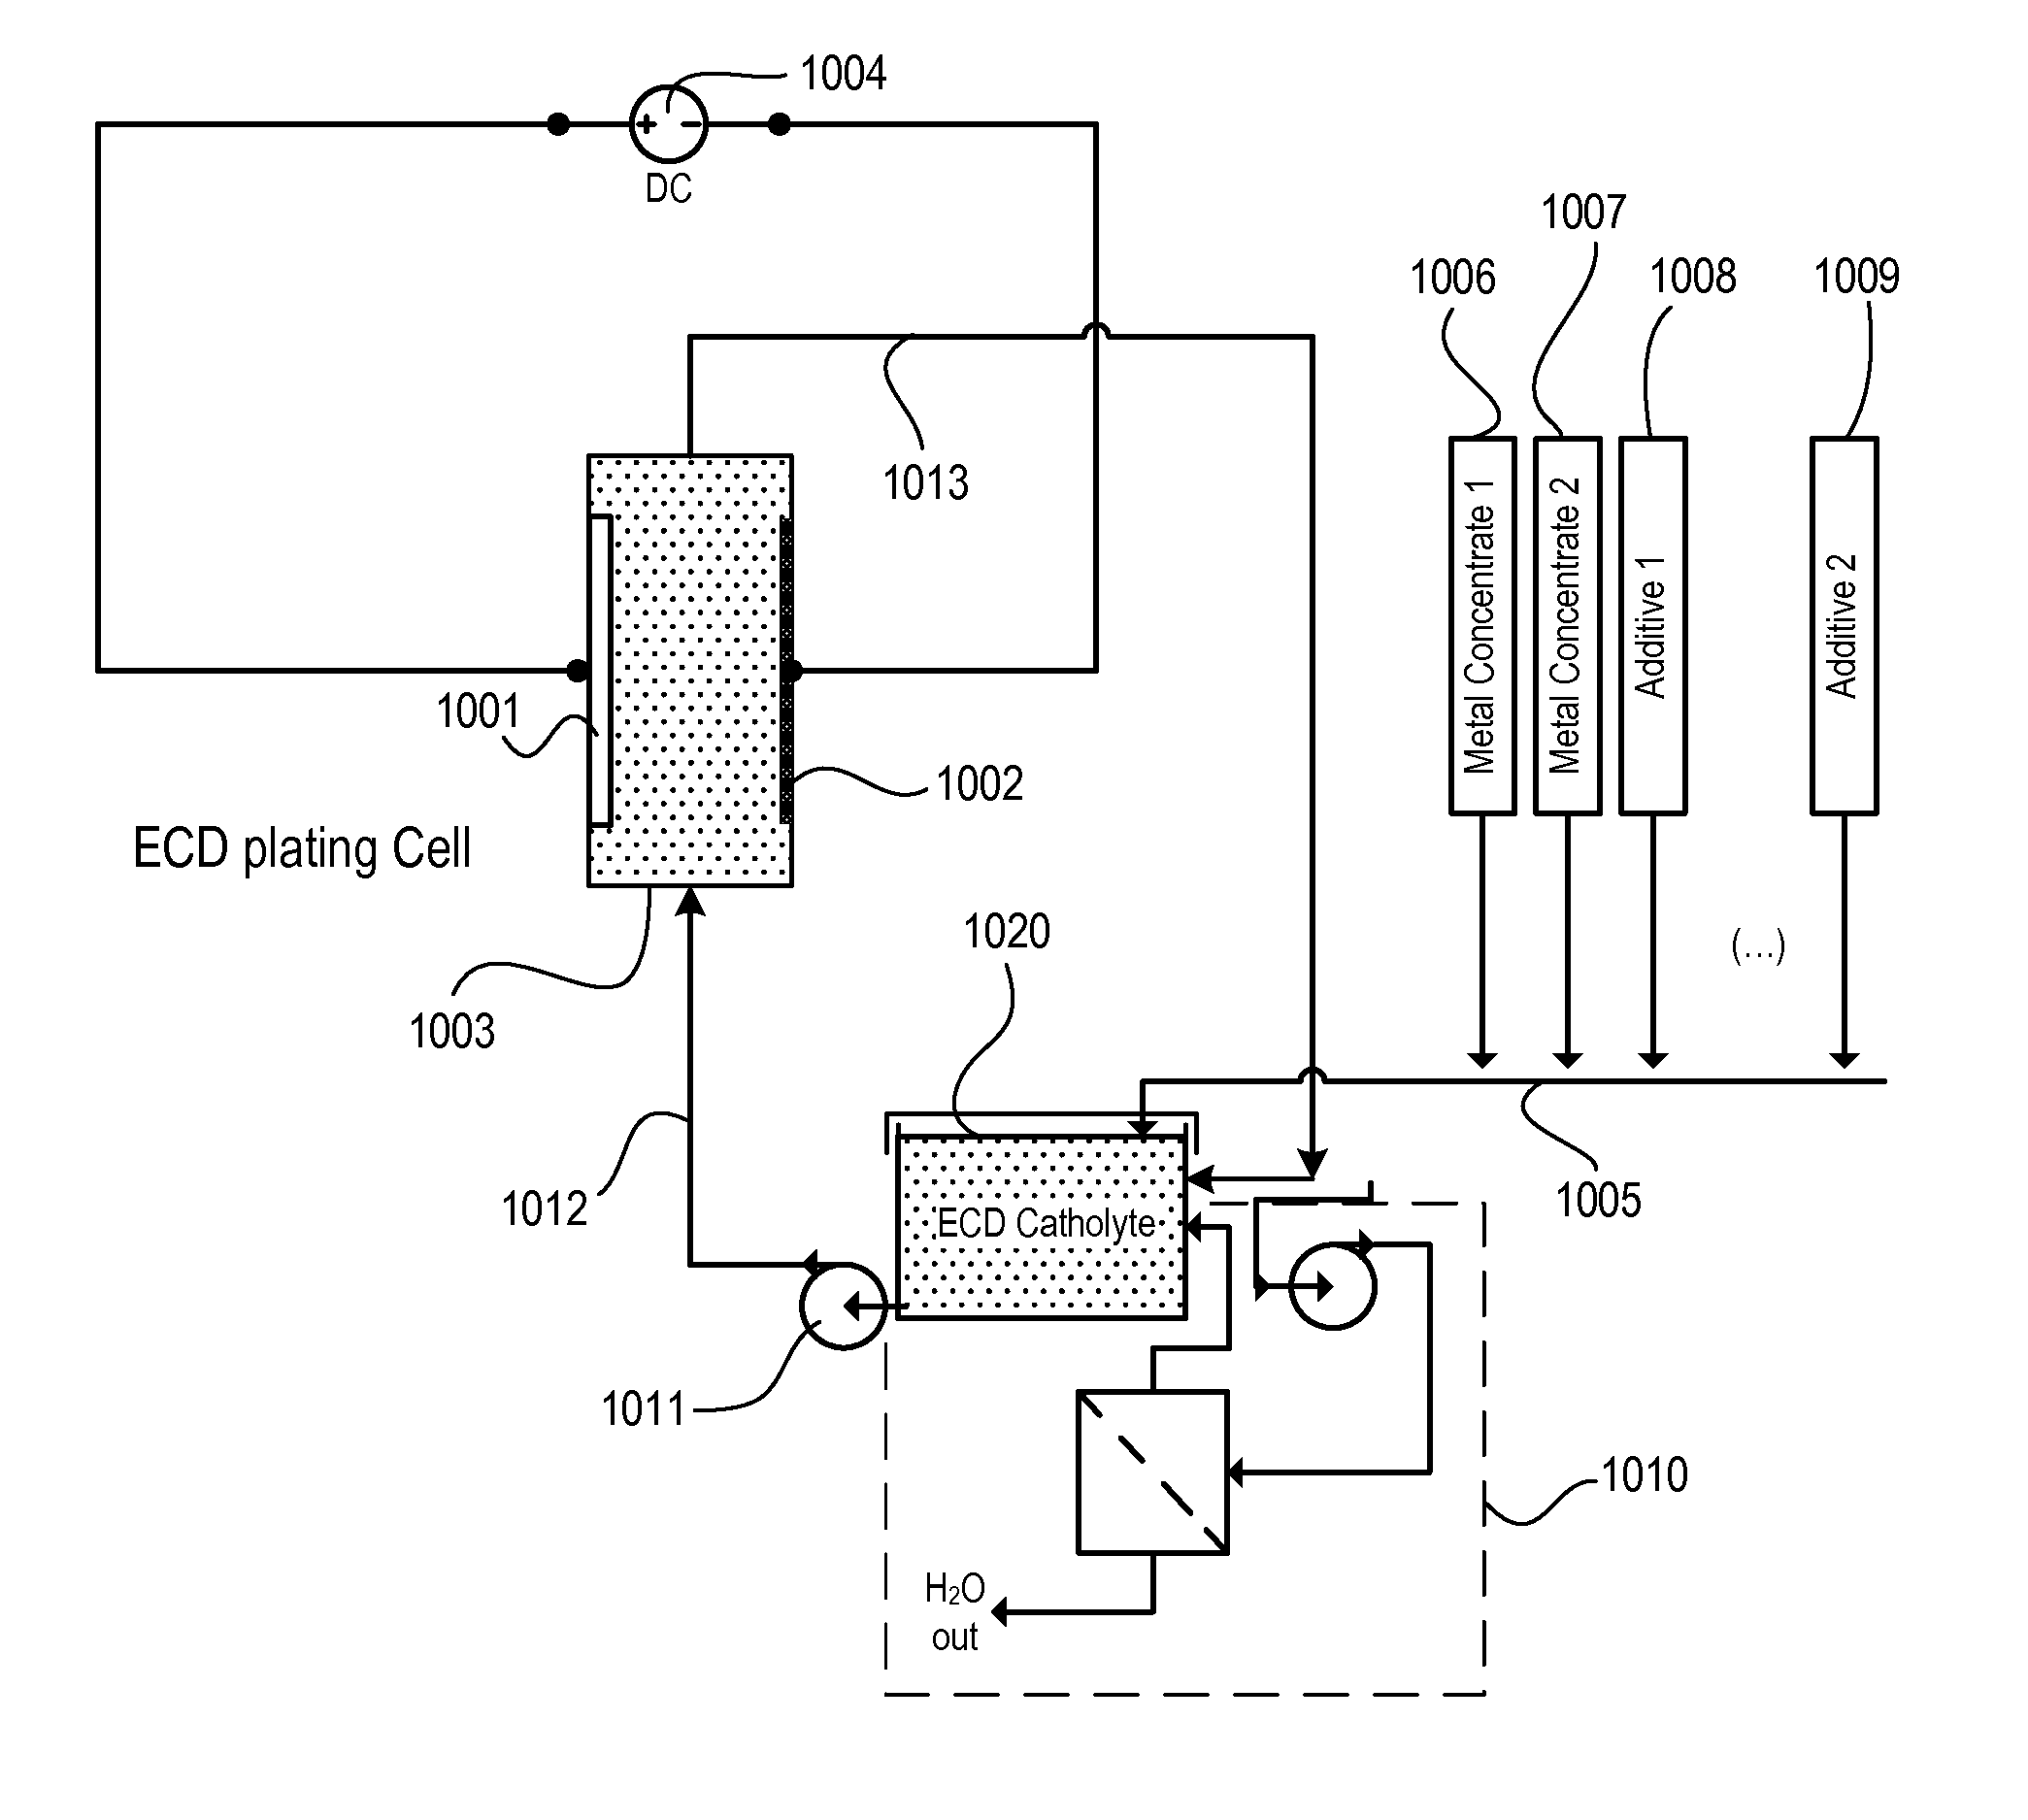 Electrochemical deposition apparatus and methods for controlling the chemistry therein